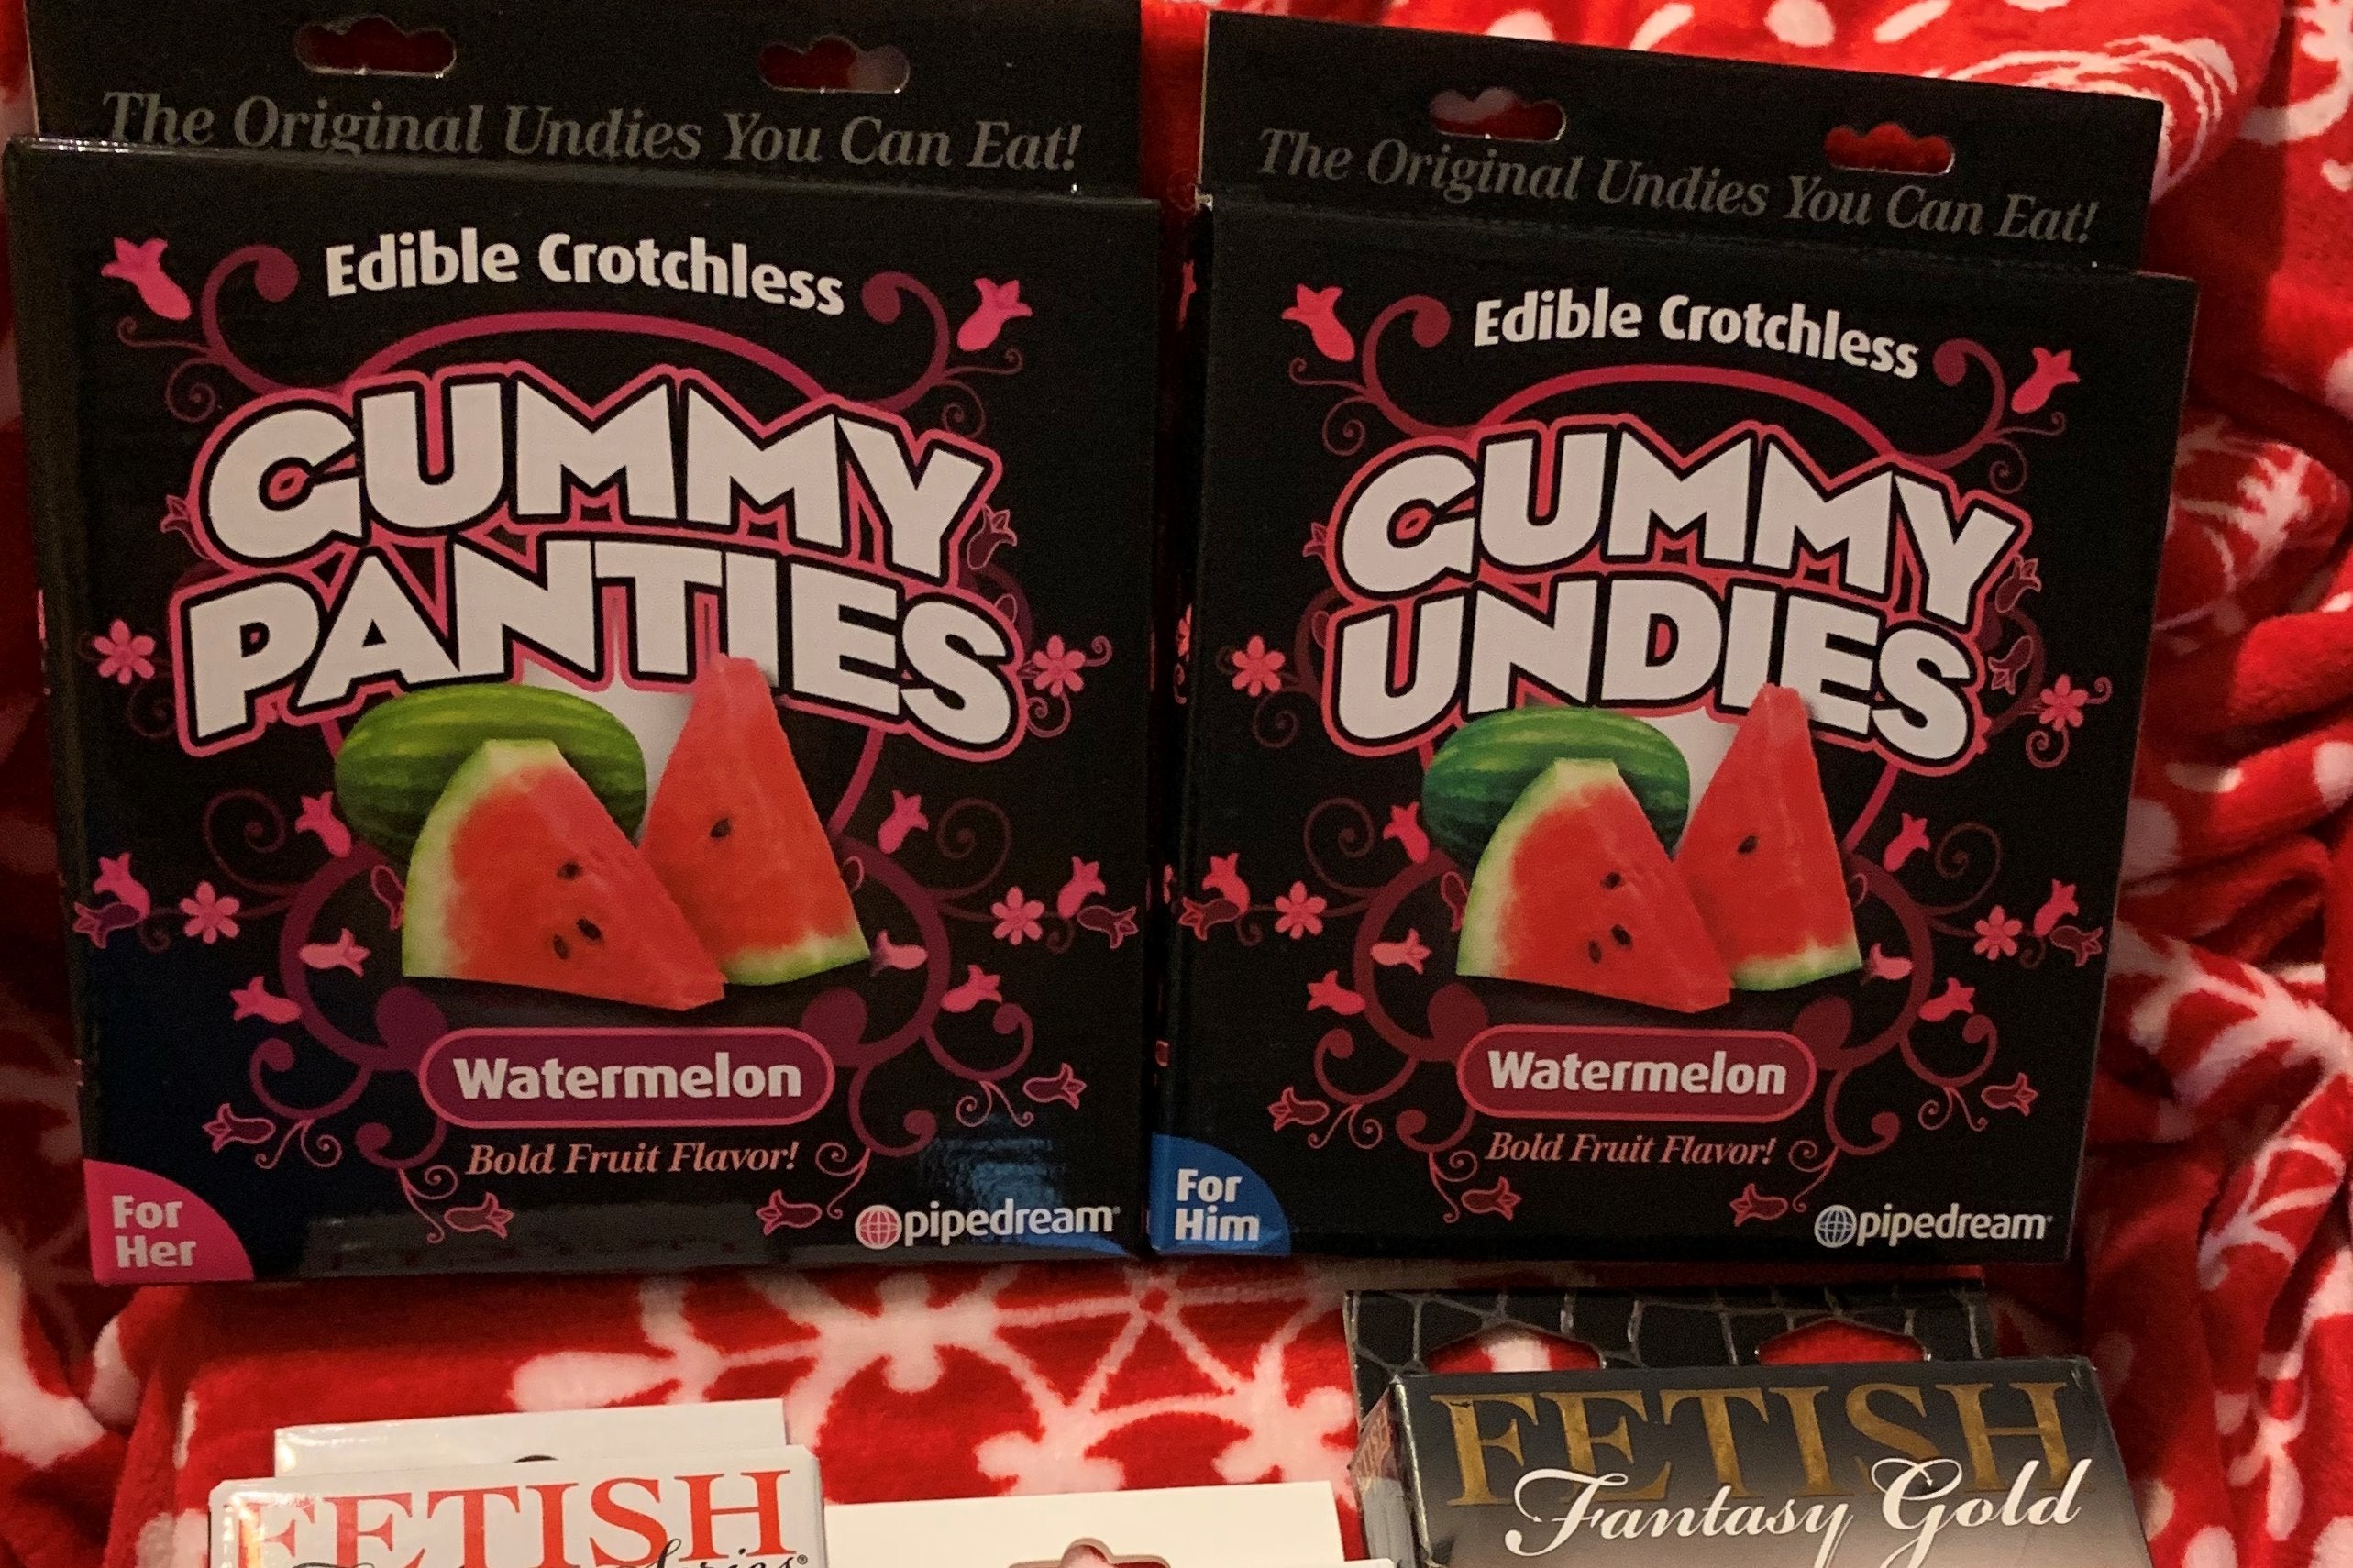 Edible Crotchless Gummy Panties For Him-Strawberry